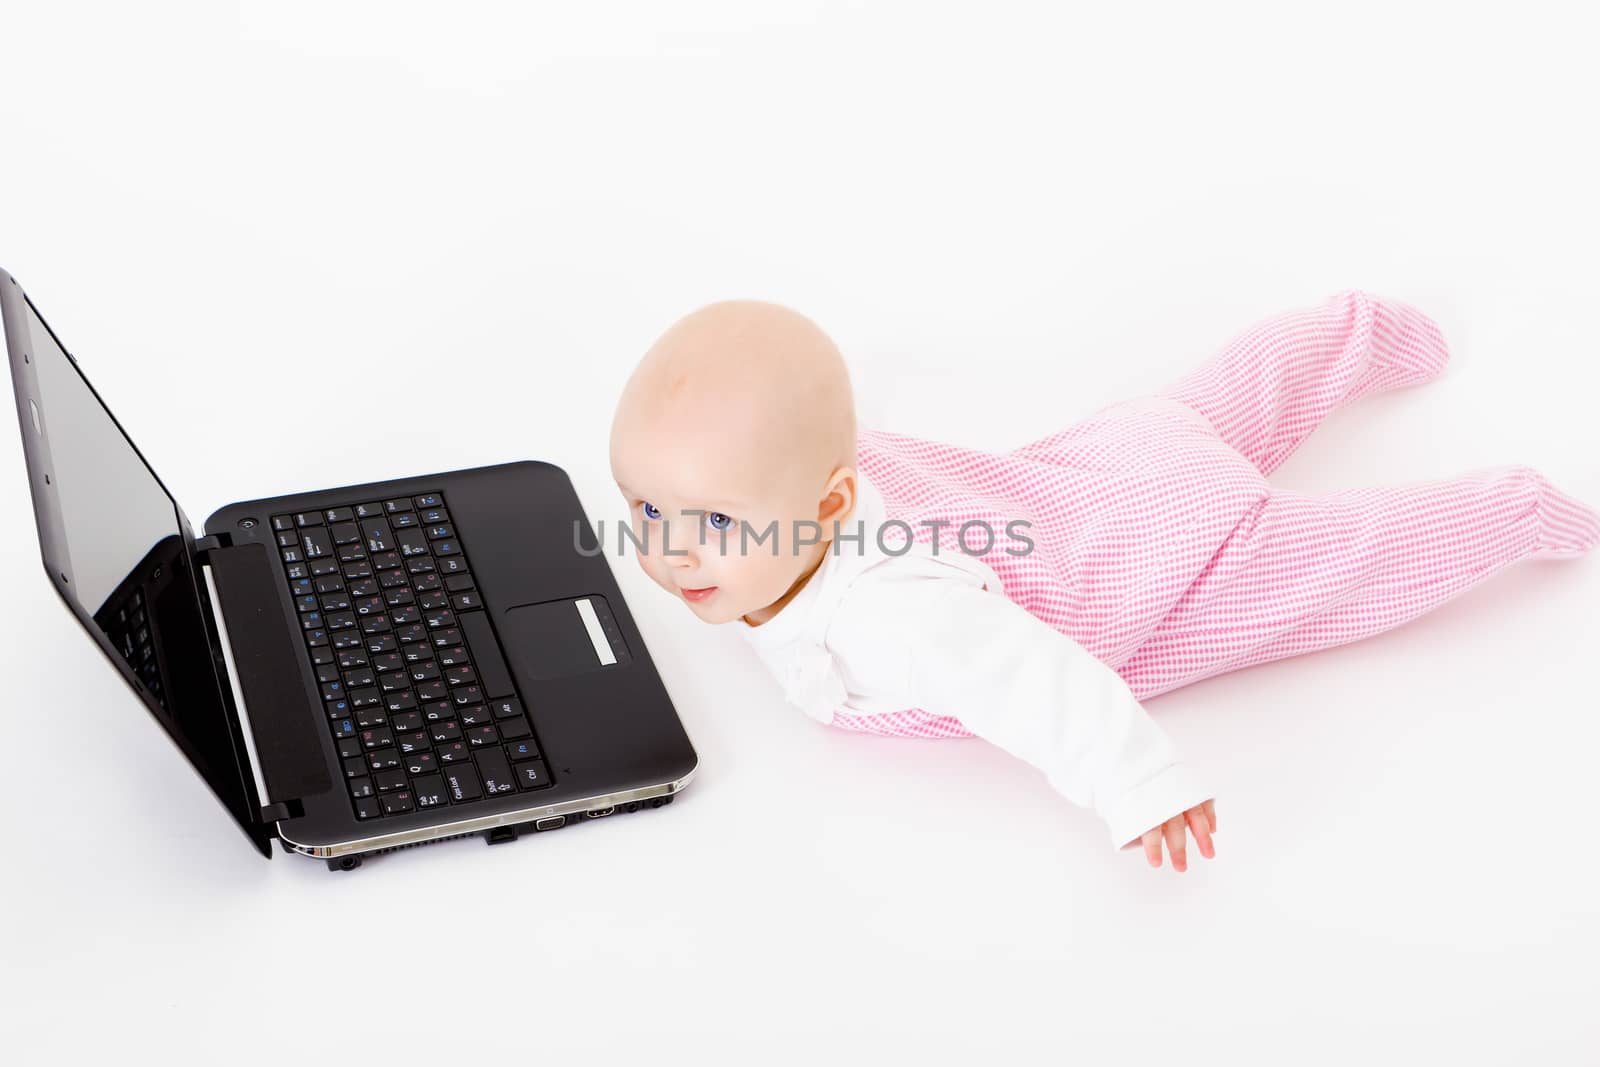 wearing a rompers baby with laptop. studio photo